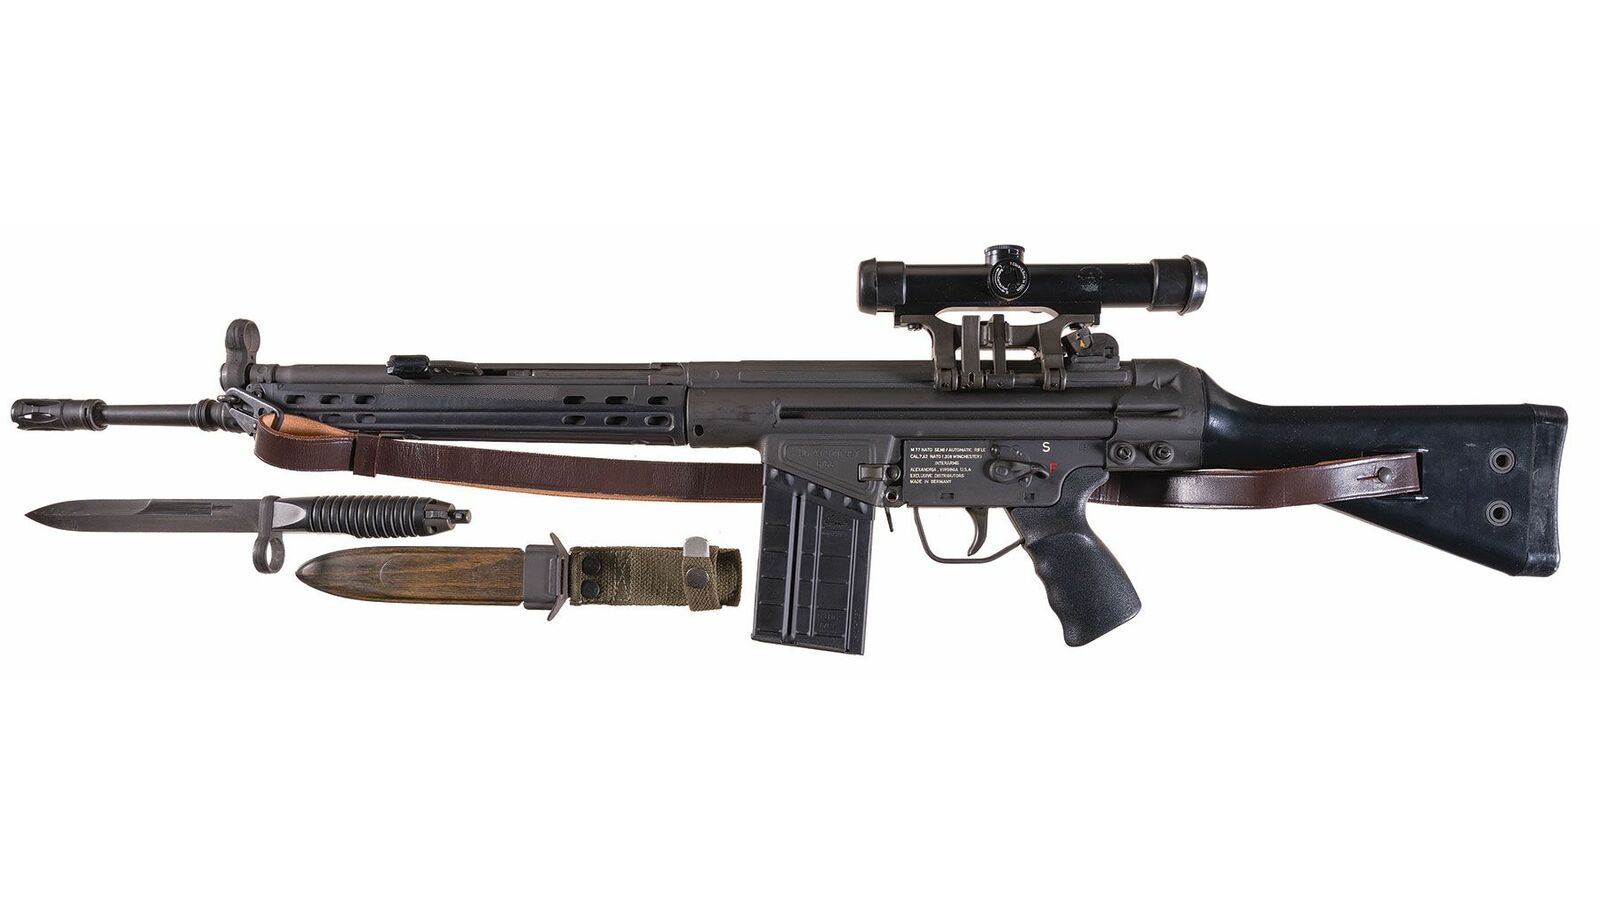 The HK41 is a semi-automatic civilian version of the H&K G3 battle rifl...